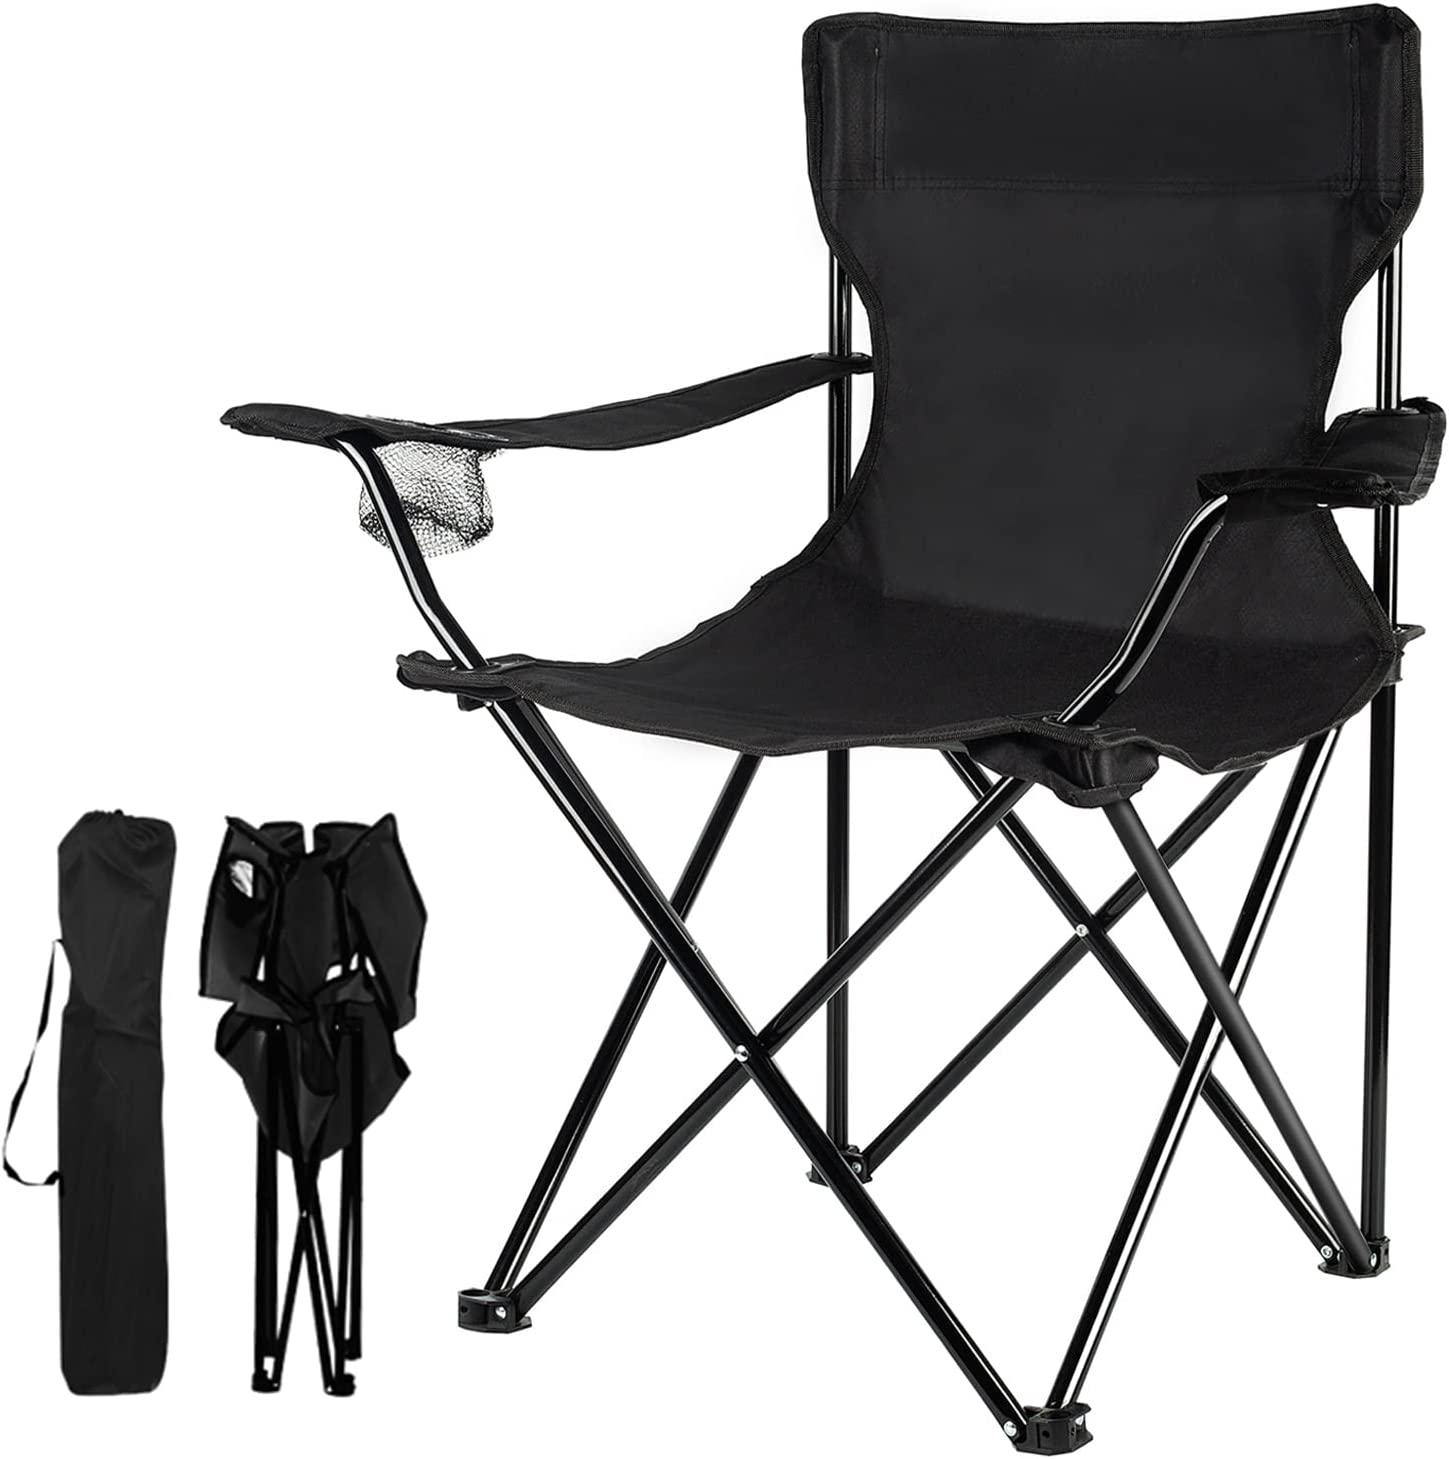 Damei century Portable Camping Chairs Enjoy The [...]